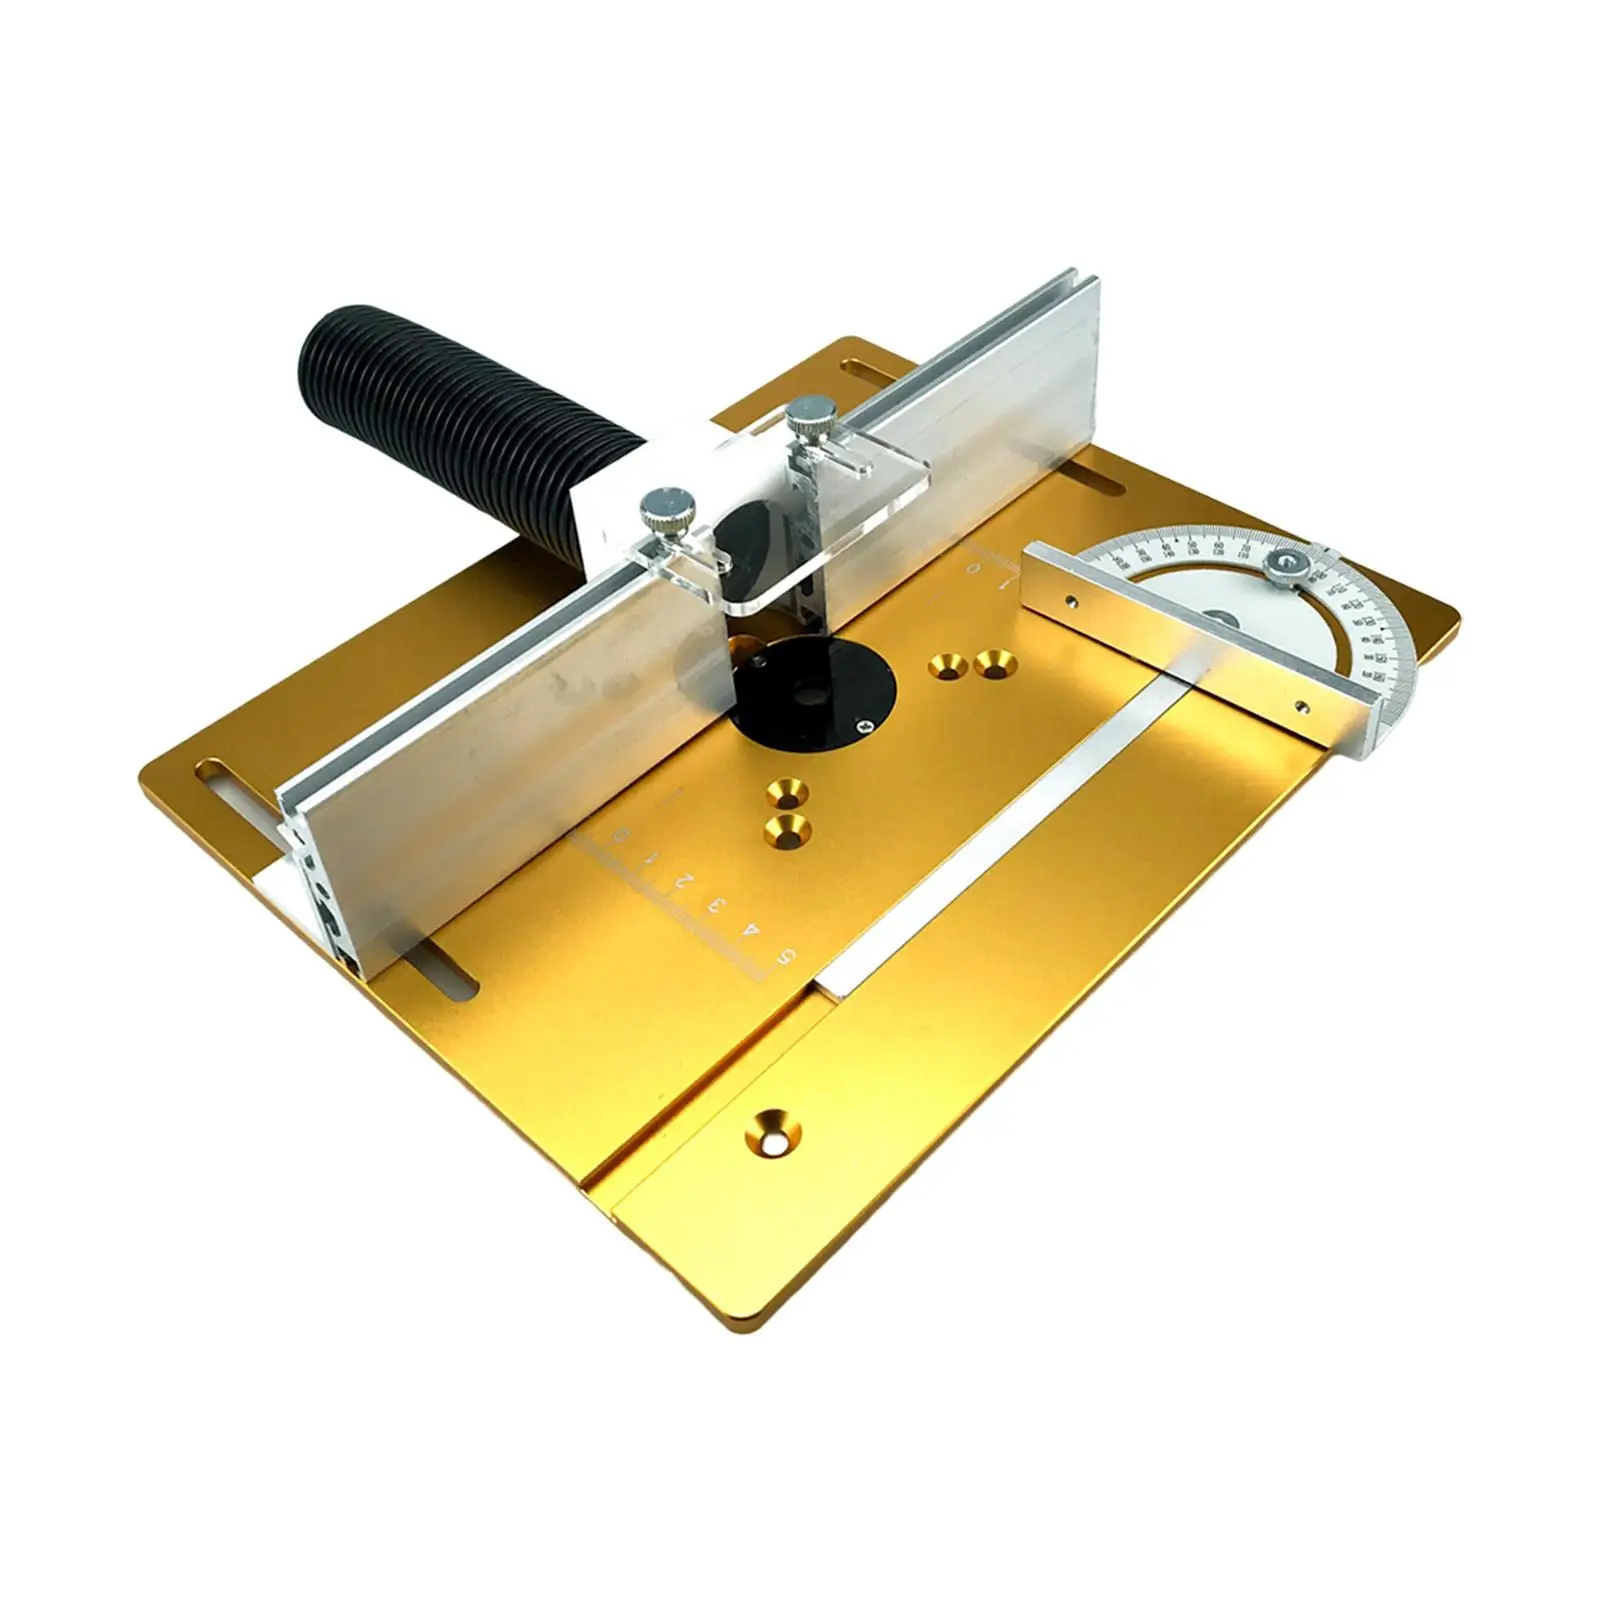 Aluminum Alloy Router Table Insert Plate Auxiliary Tool Sliding Fence Router Table Insert Plate for Milling Engraving Wood Tools